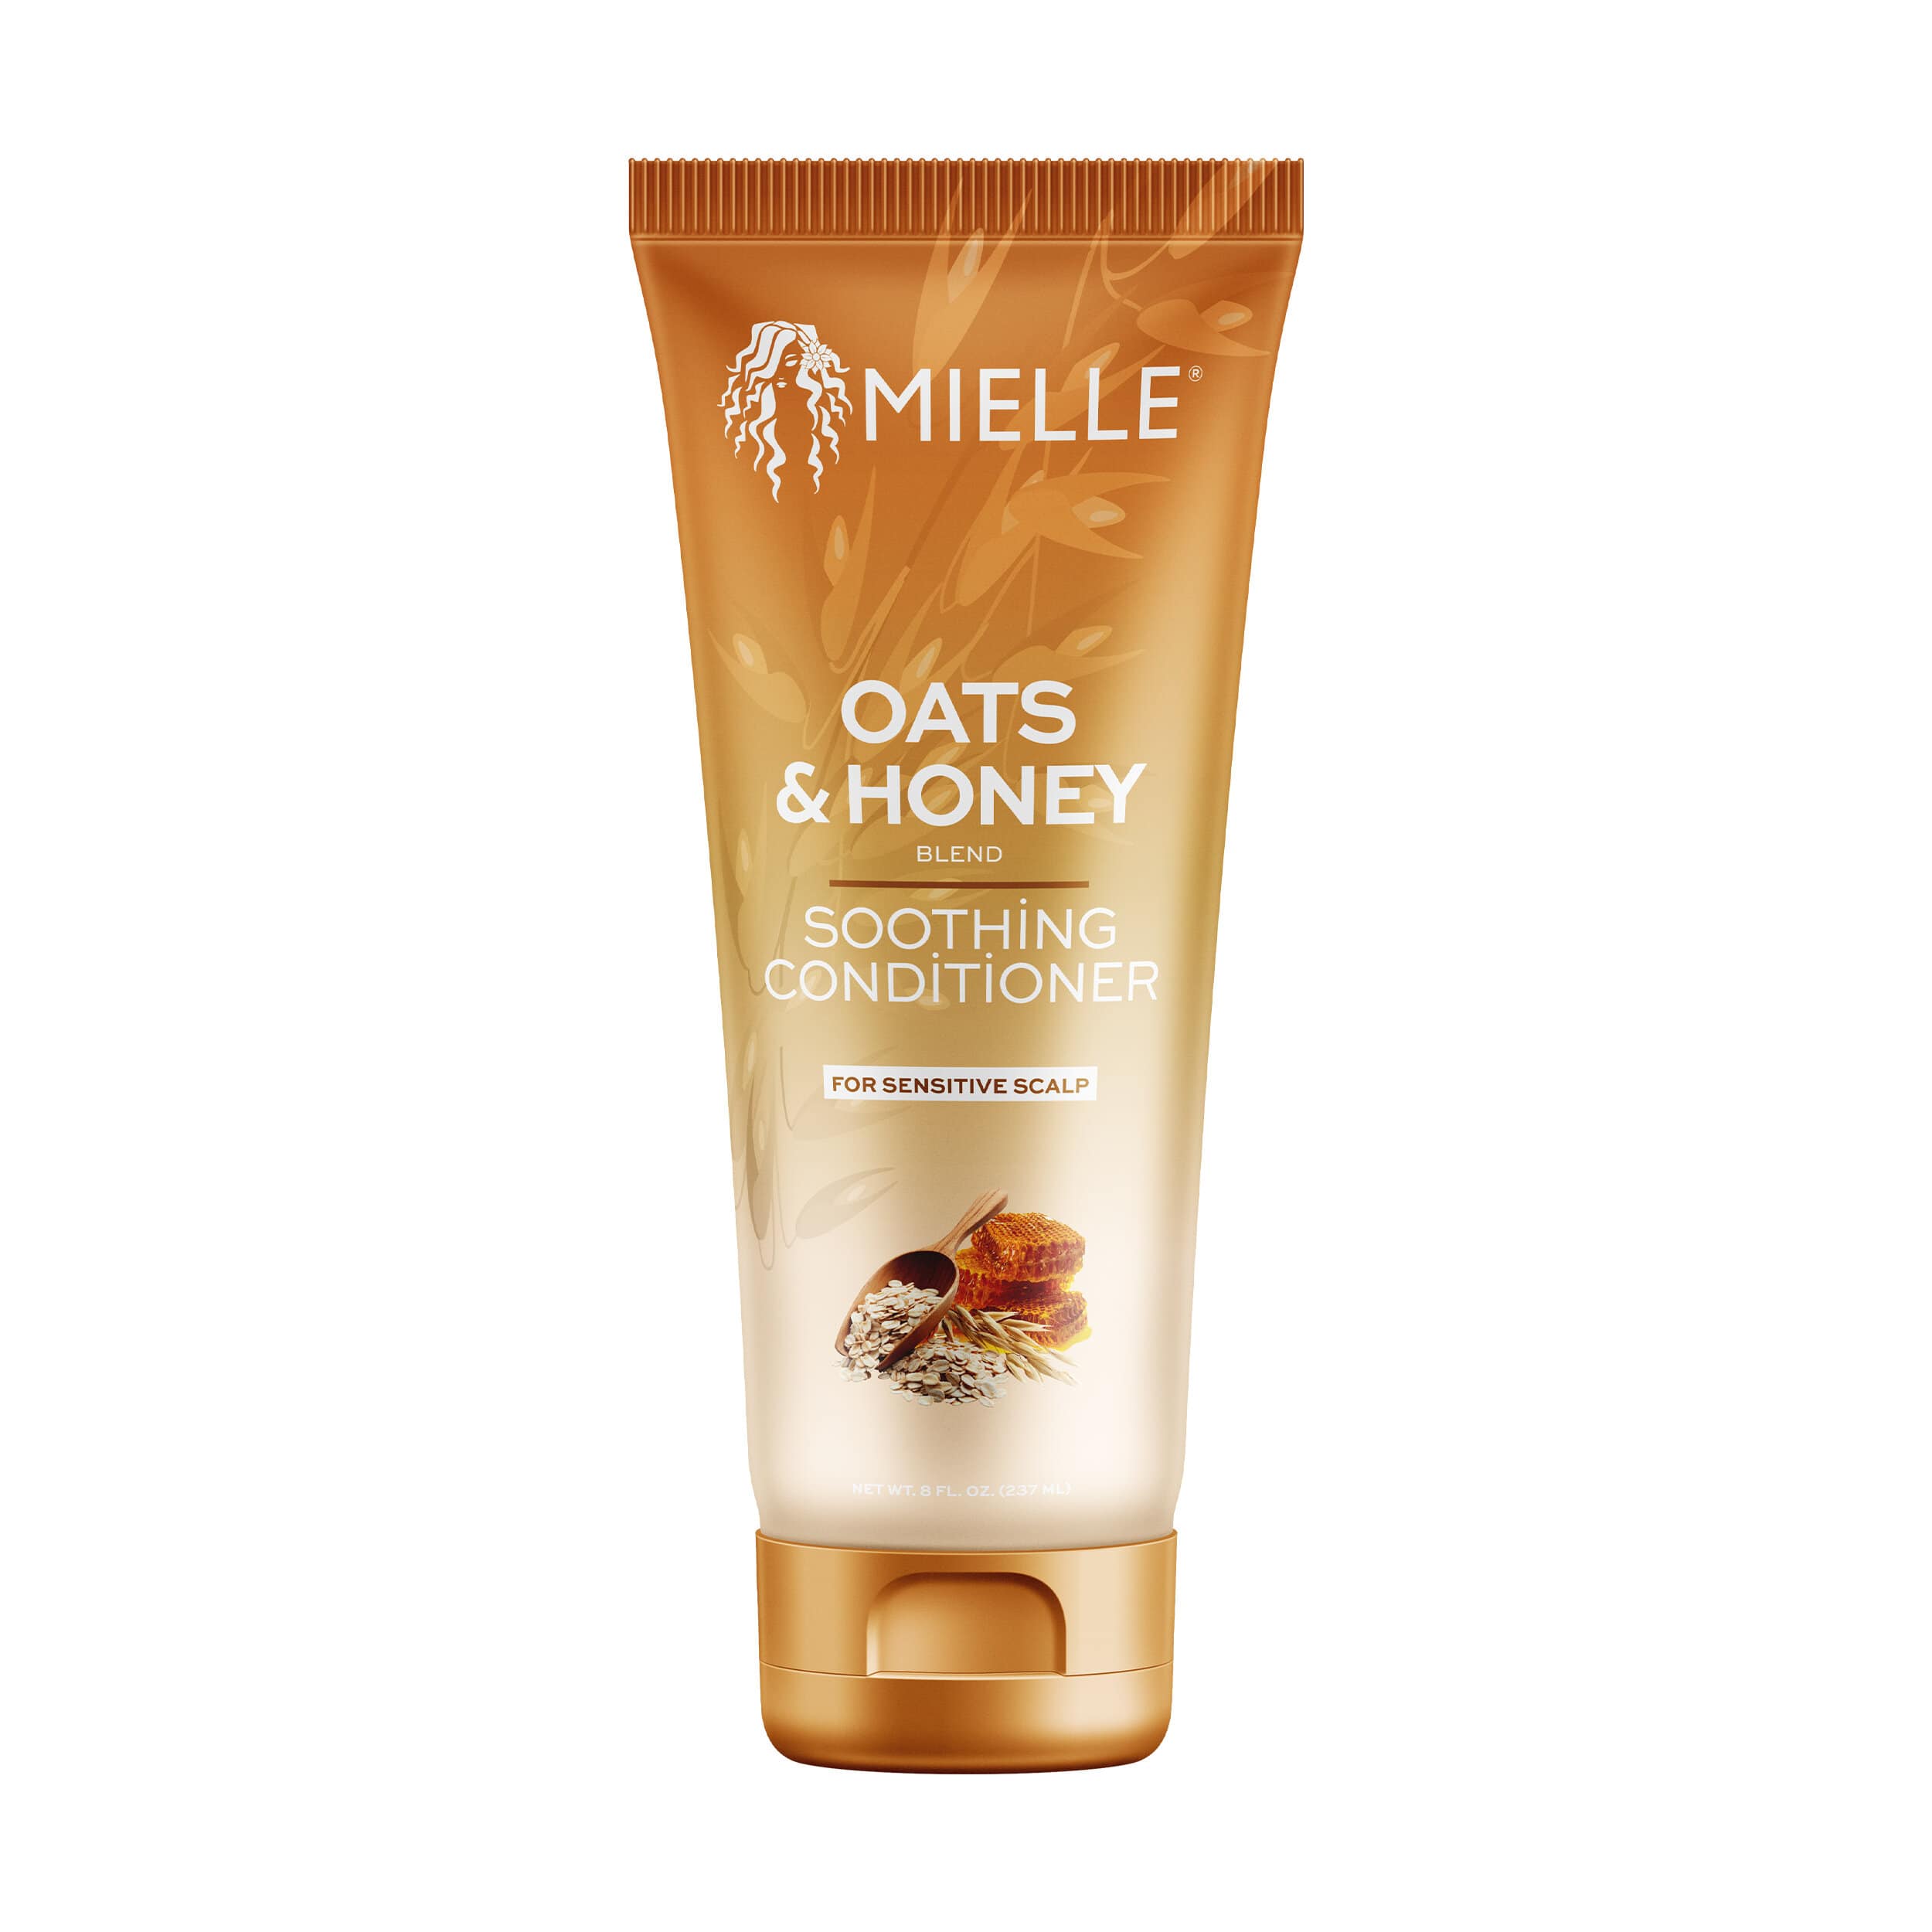 Mielle Organics Oats & Honey Sensitive Scalp Soothing Conditioner 8 oz - image 1 of 4